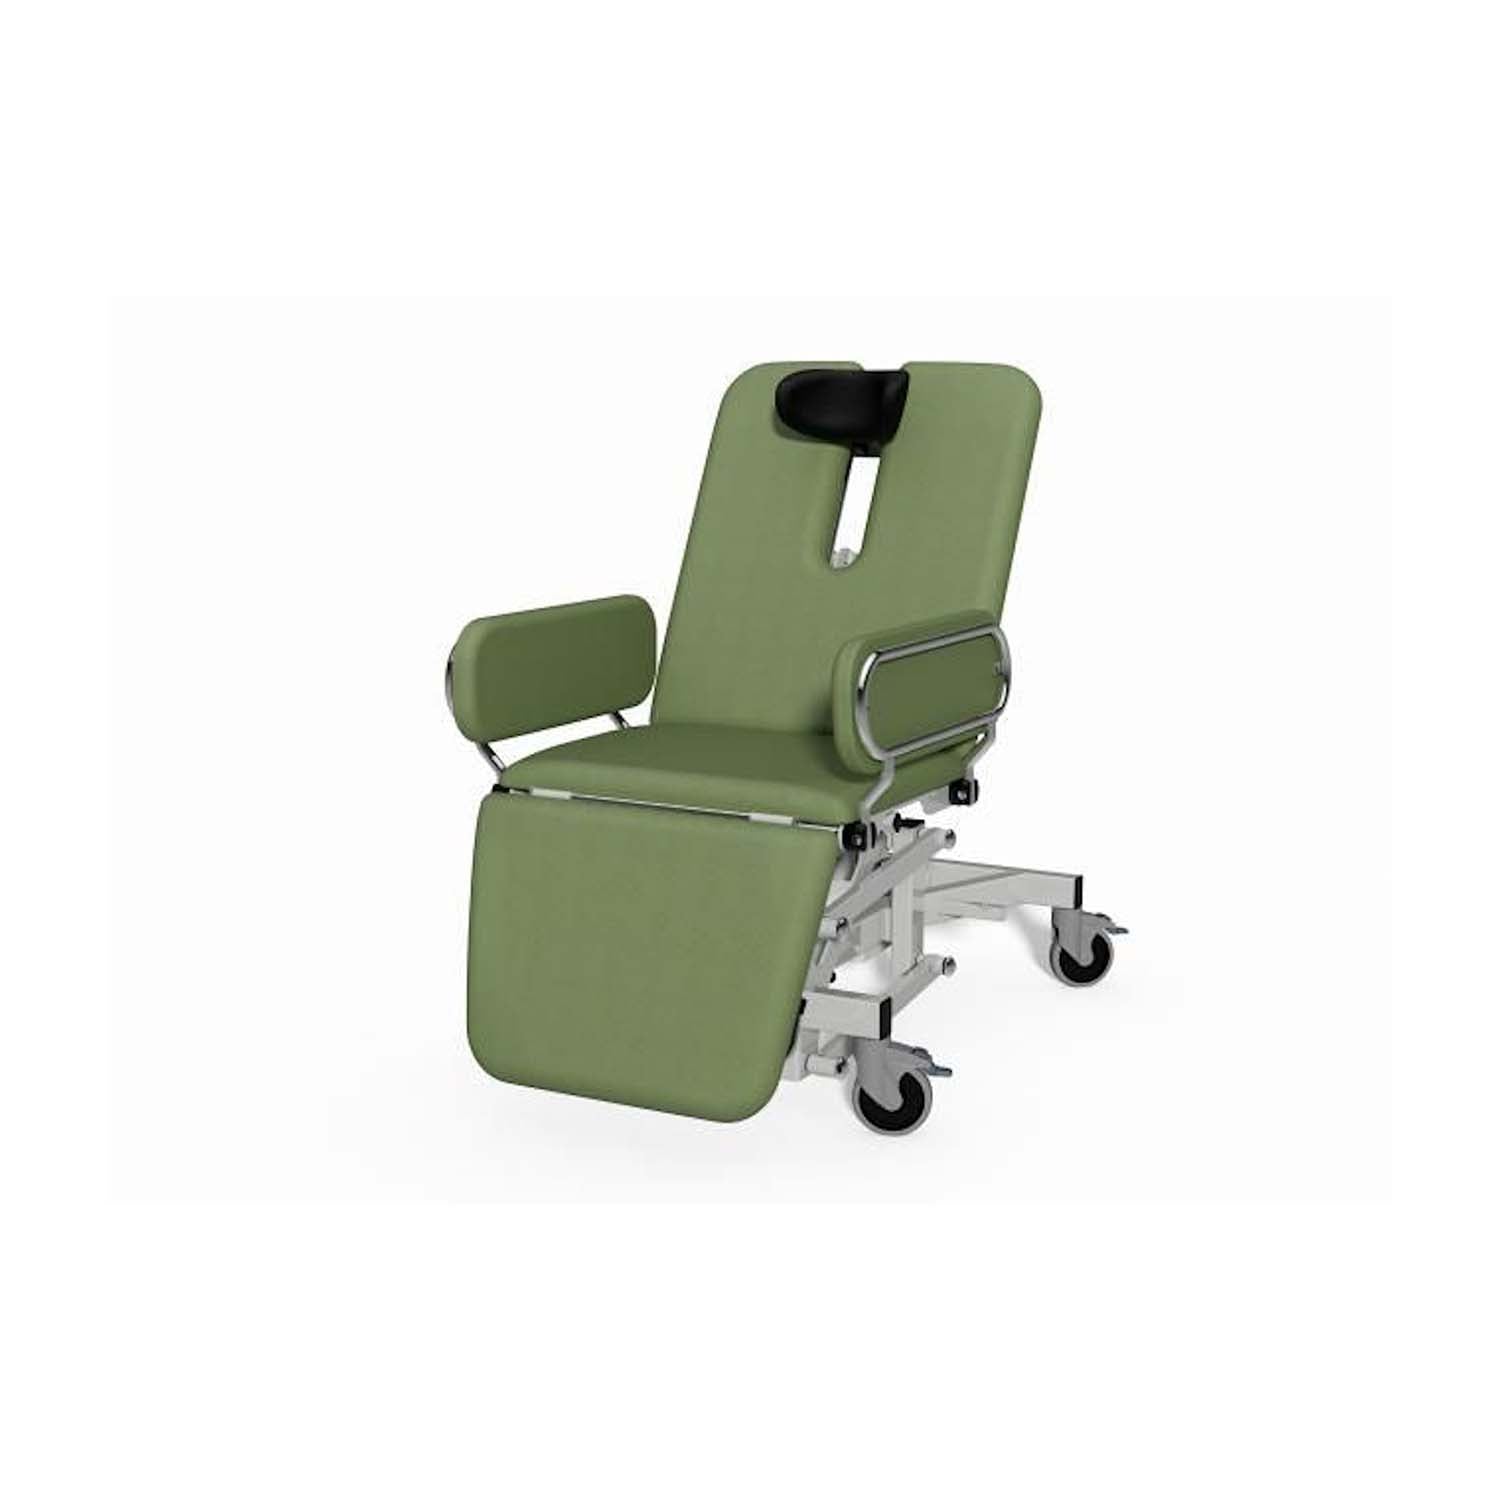 Plinth 2000 Model 93O Ophthalmology Couch | Wasabi